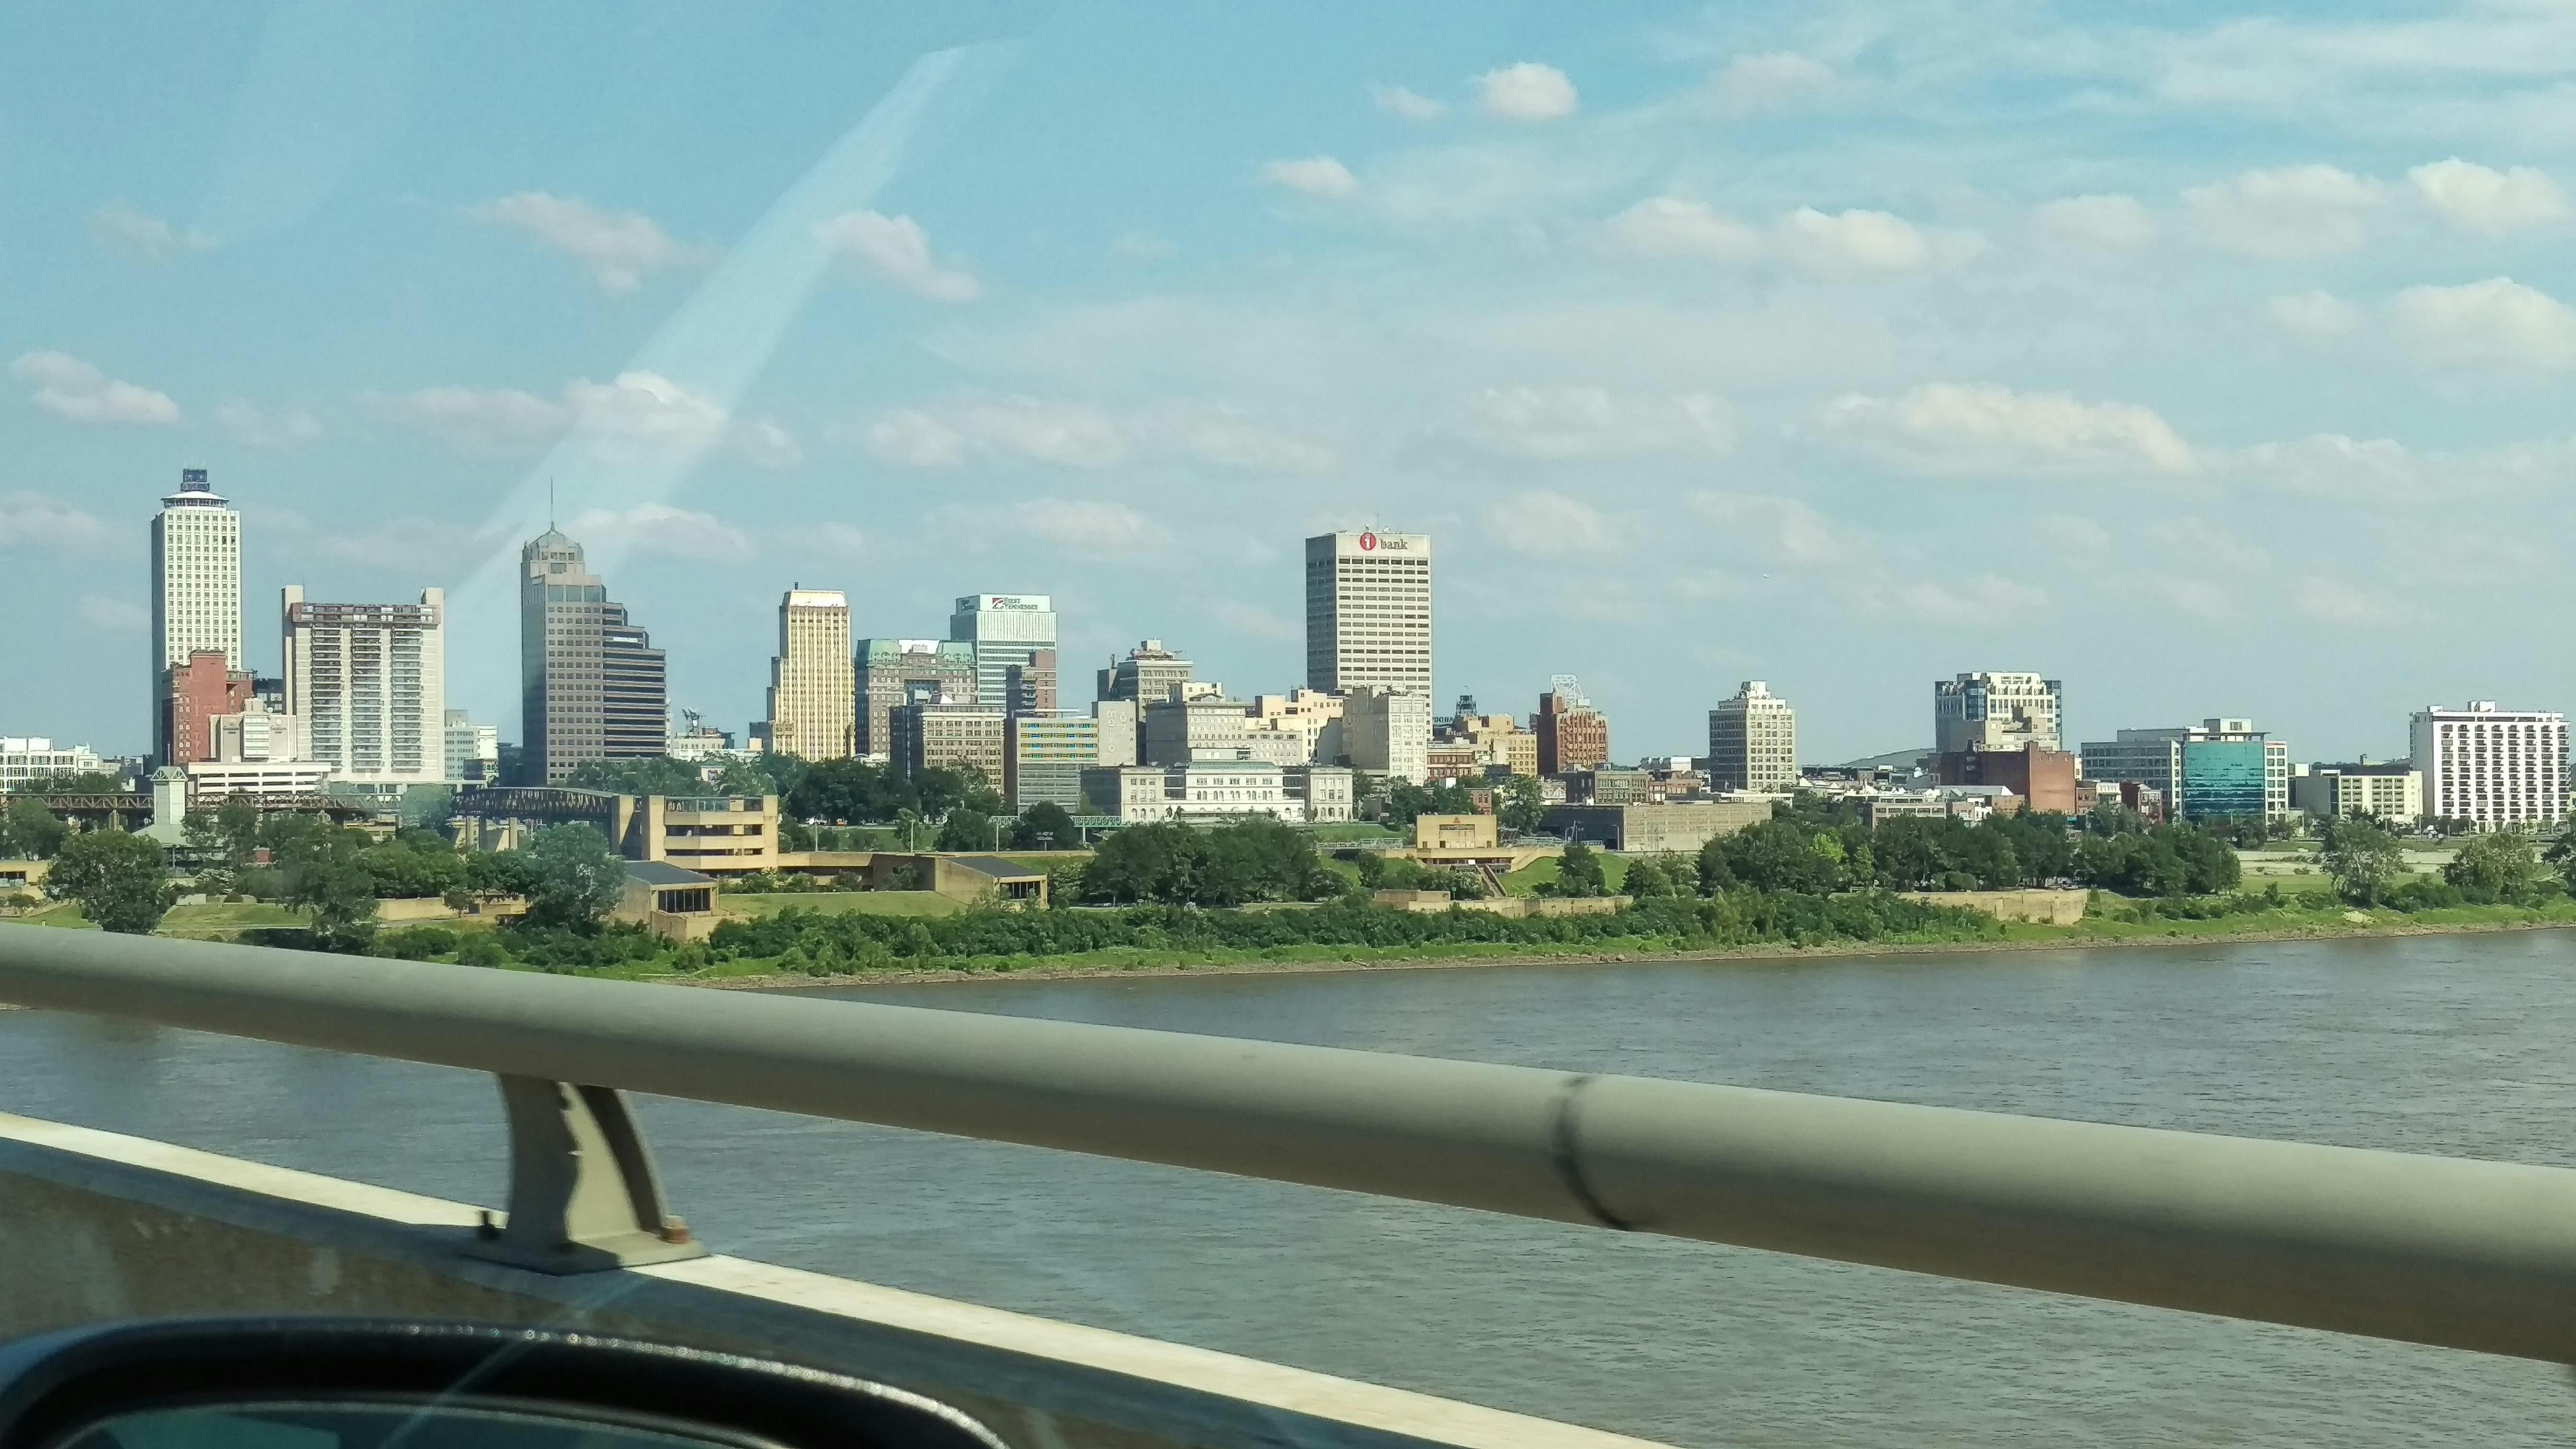 Free stock photo of memphis, Mississippi River